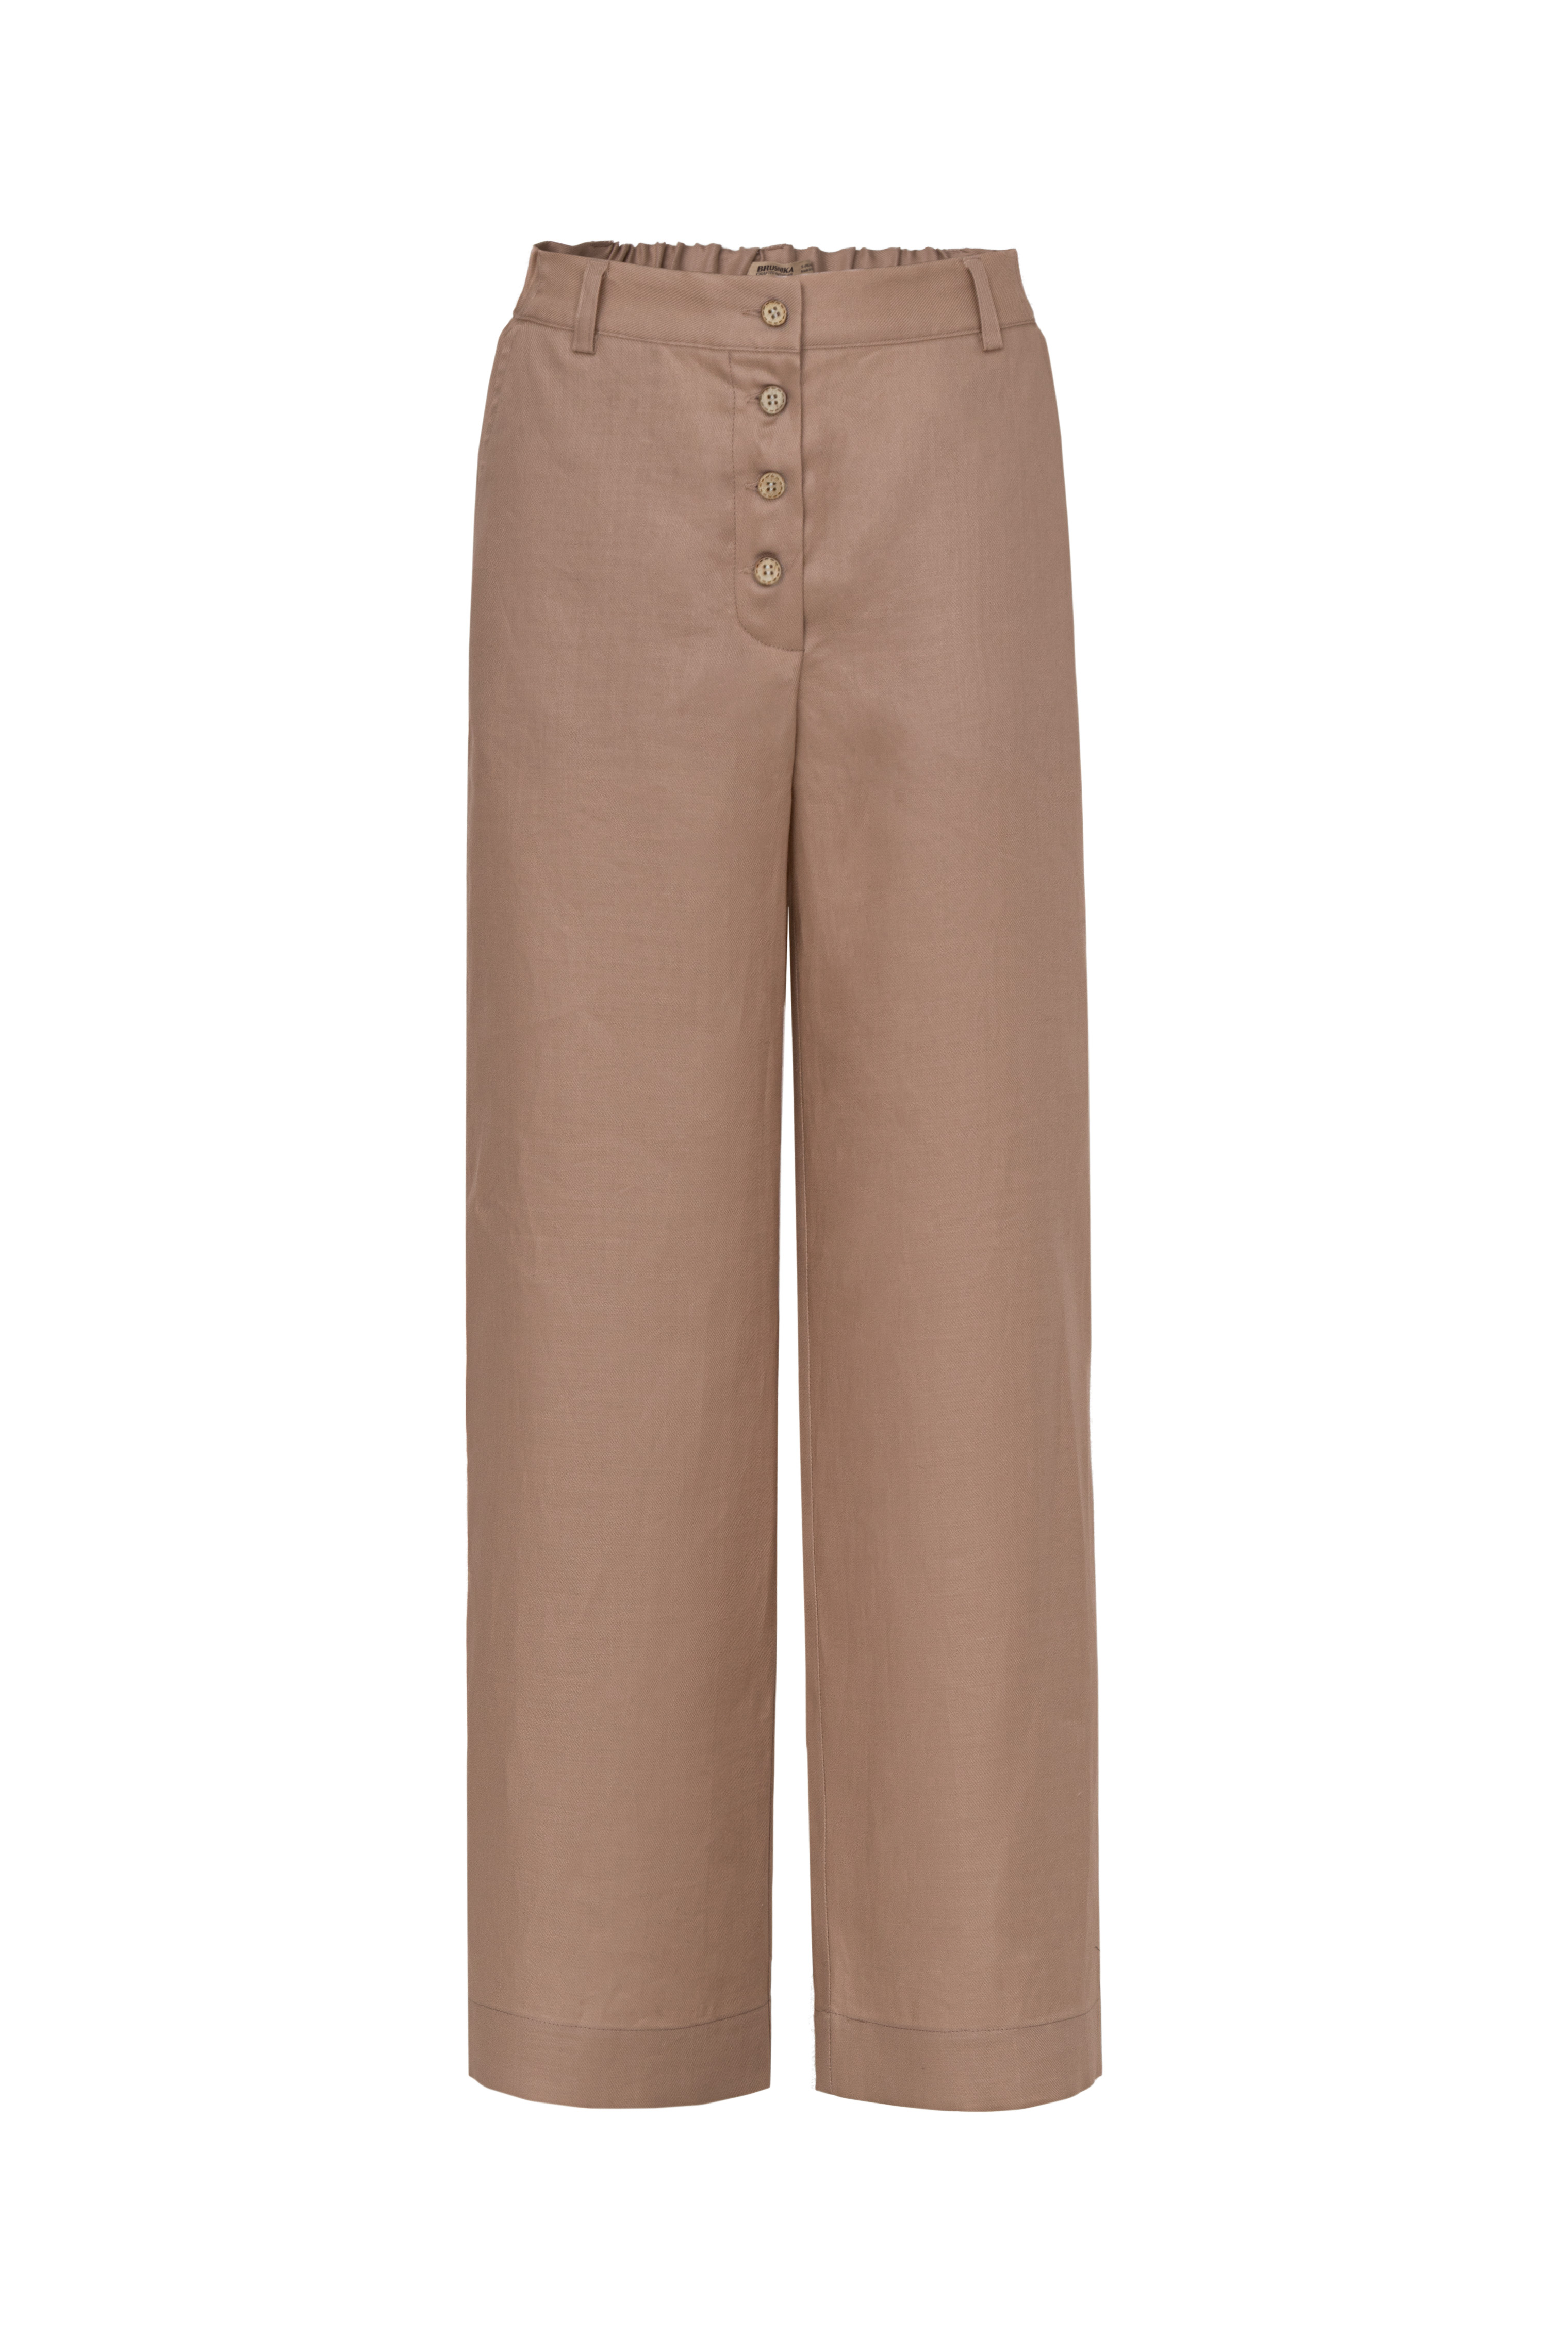 Trousers 3501-15 Brown from BRUSNiKA